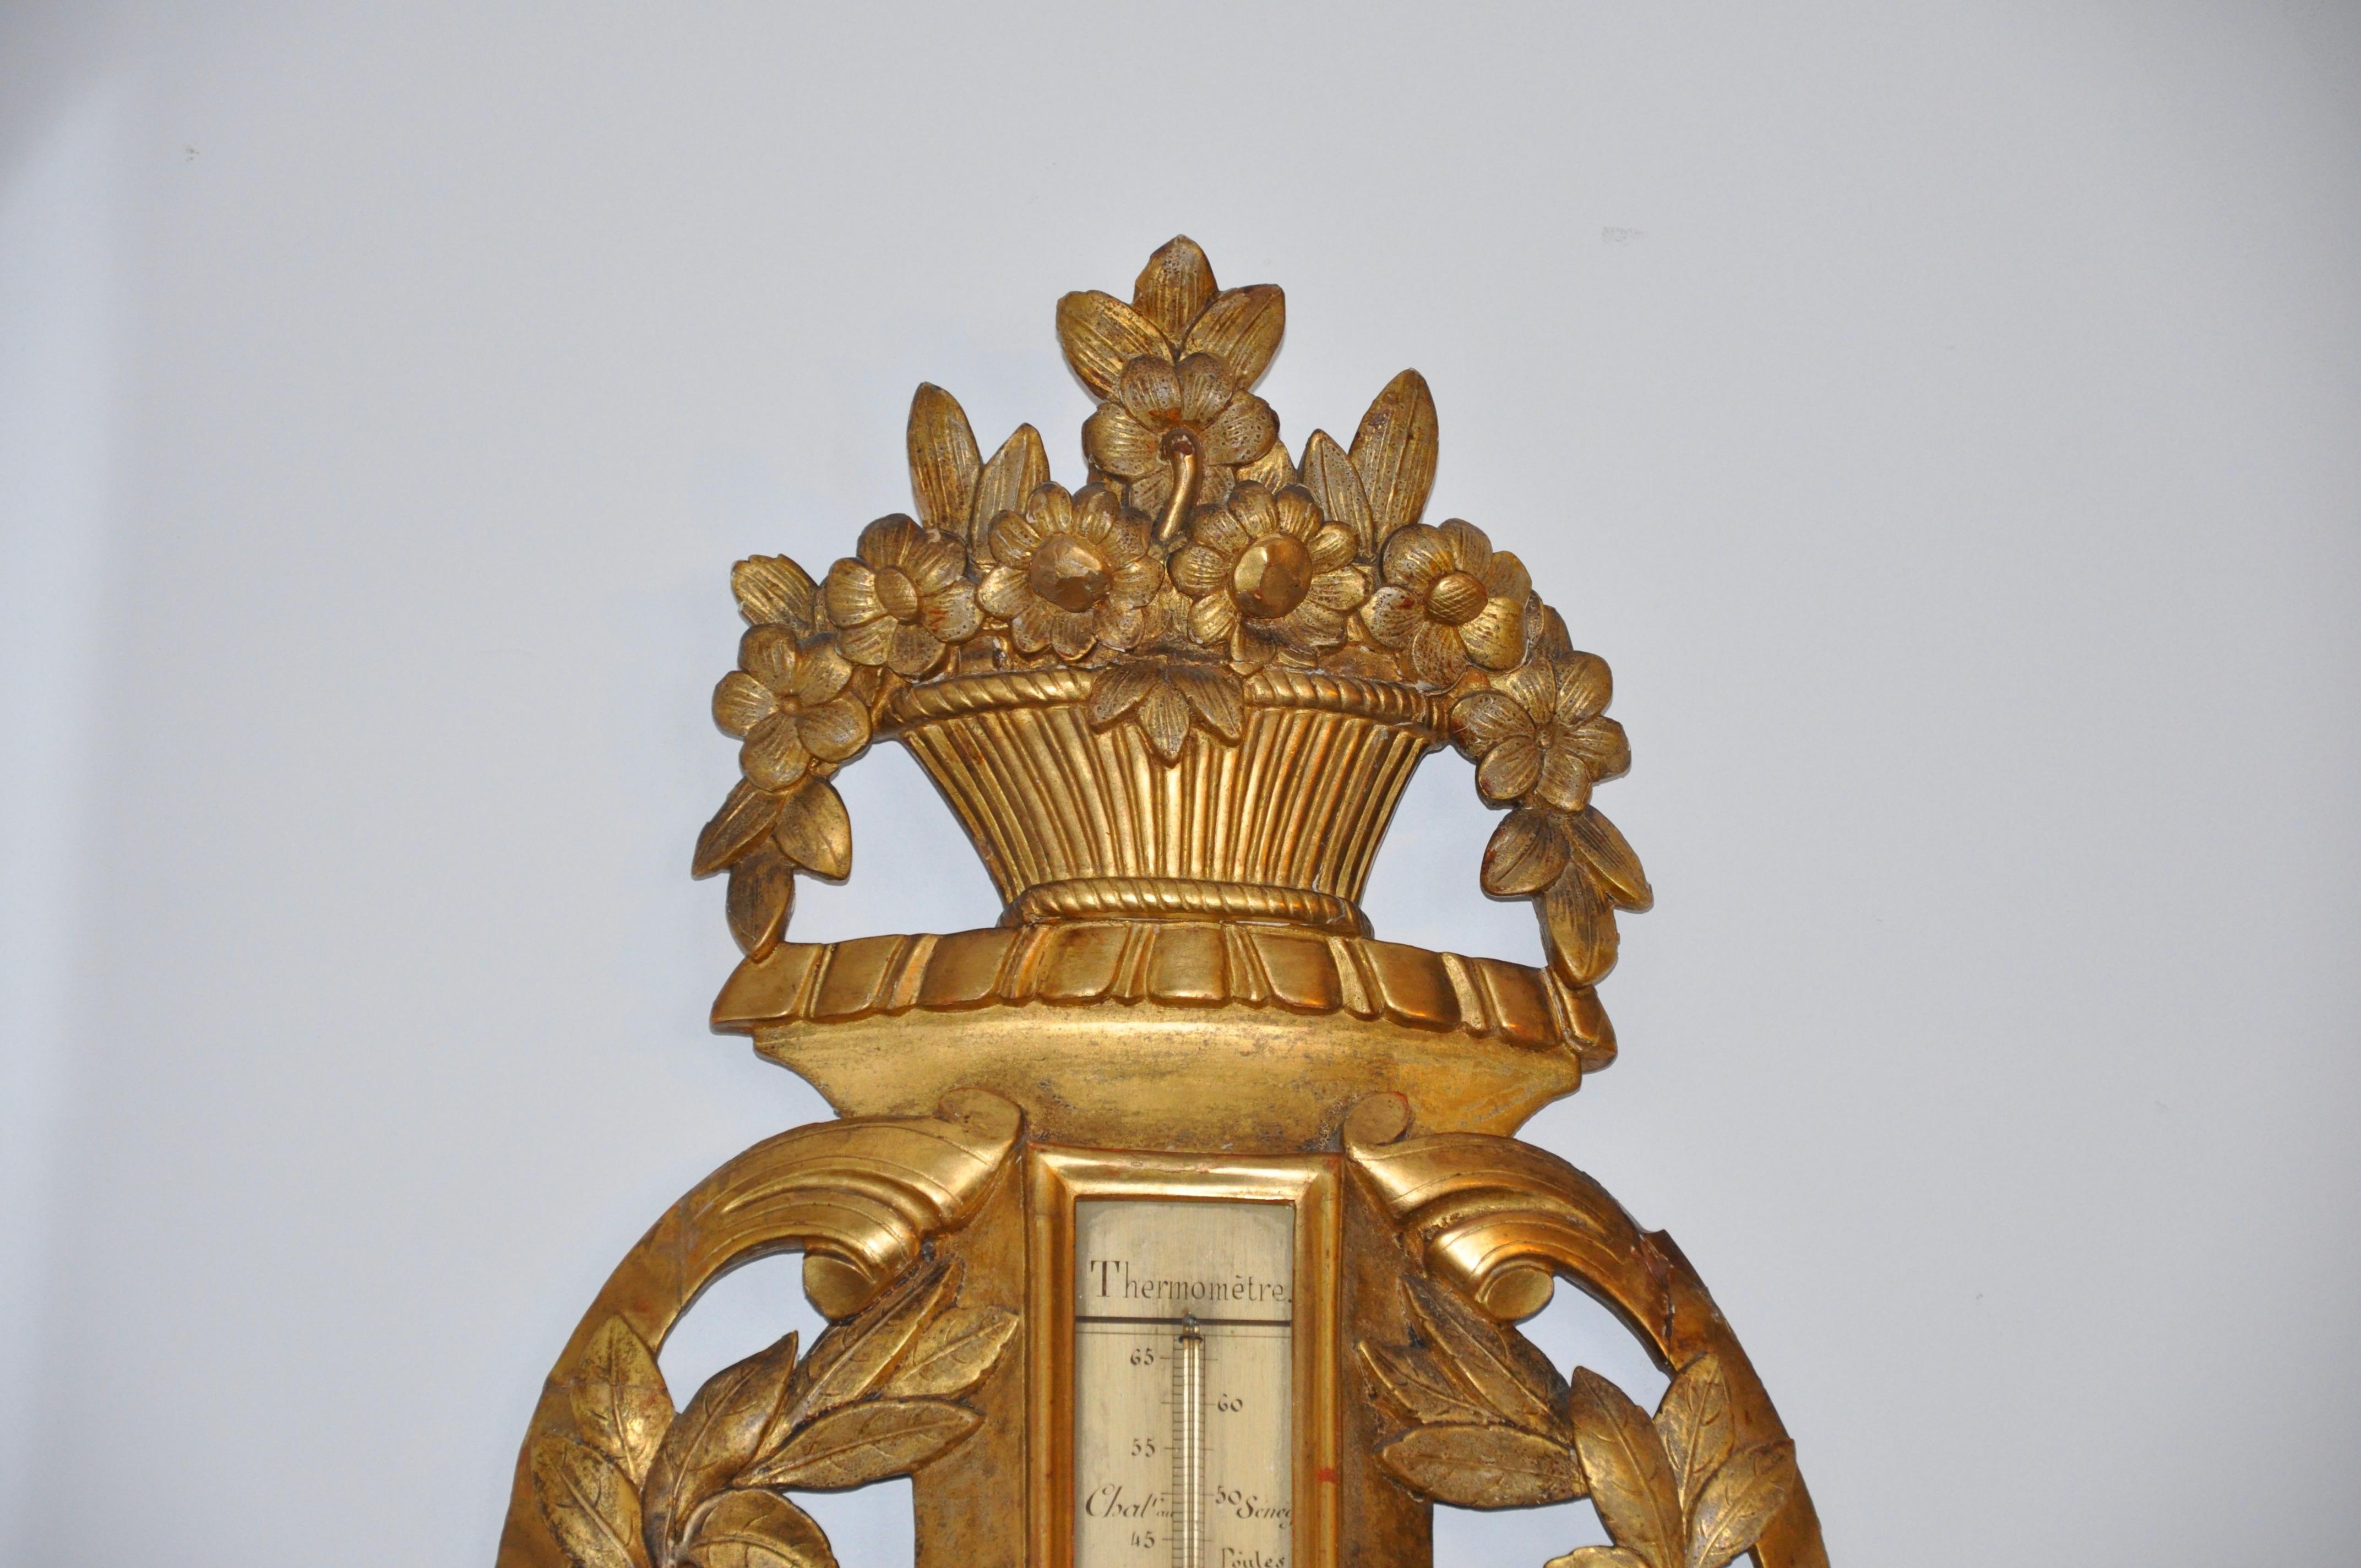 Early 19th century large scale giltwood barometer. Neoclassical Louis XVI design of all carved and original gilt foliate elements. Quite substantial.